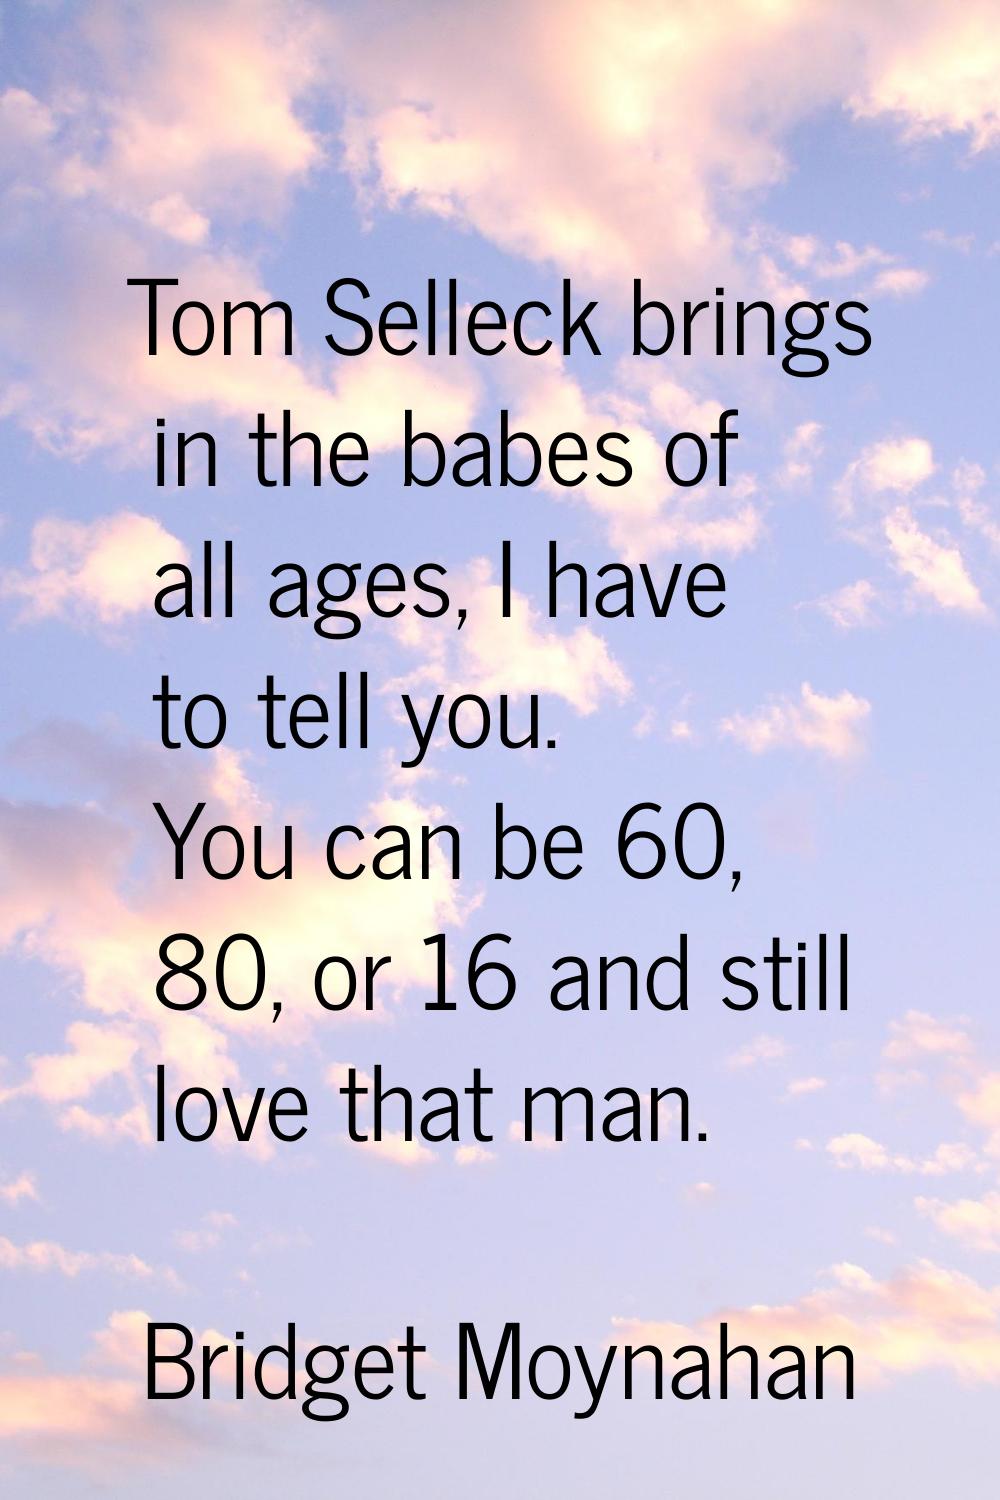 Tom Selleck brings in the babes of all ages, I have to tell you. You can be 60, 80, or 16 and still